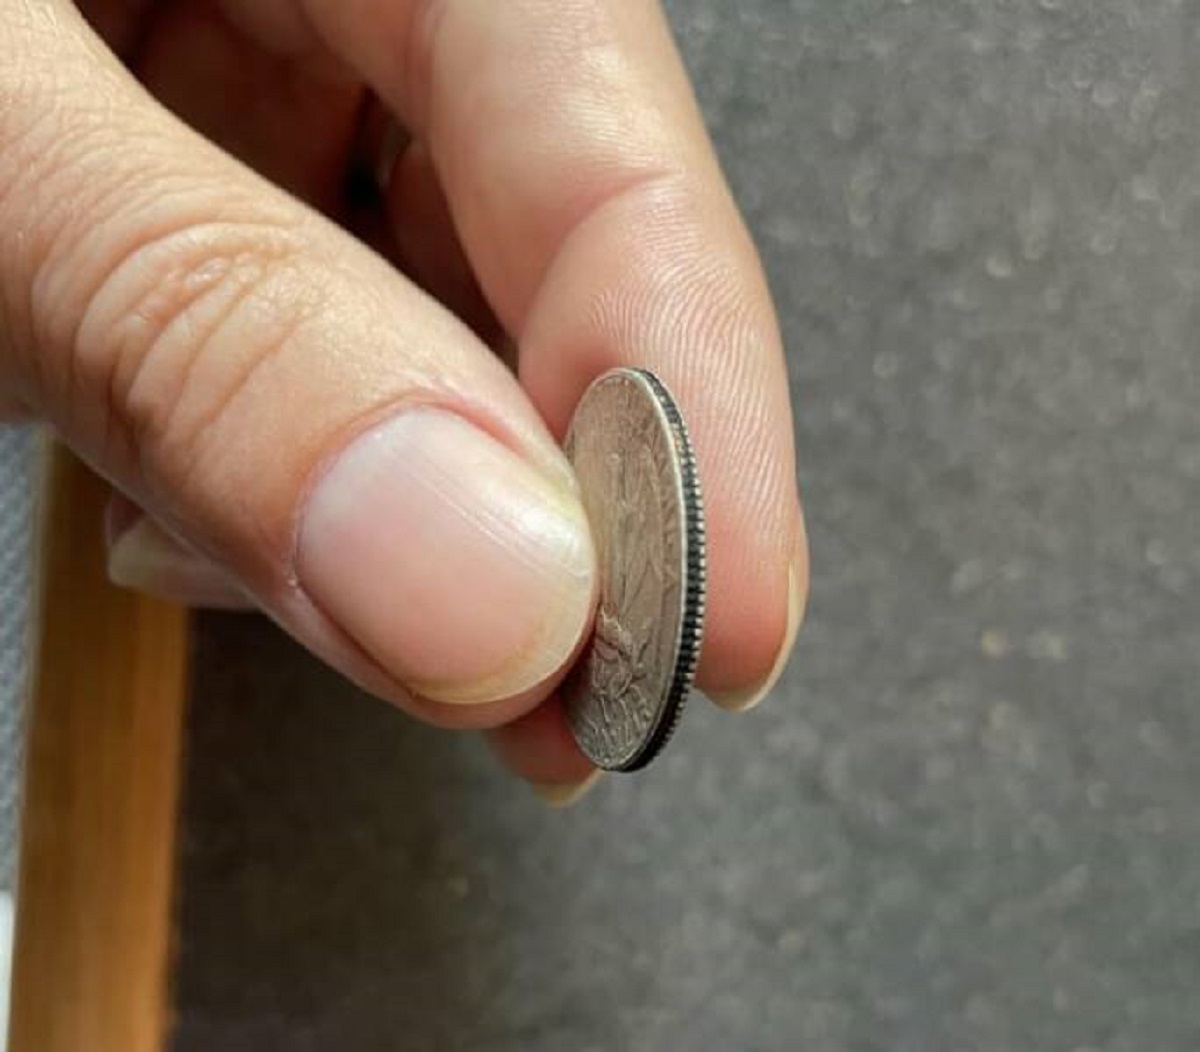 "I received a counterfeit quarter in my change today"